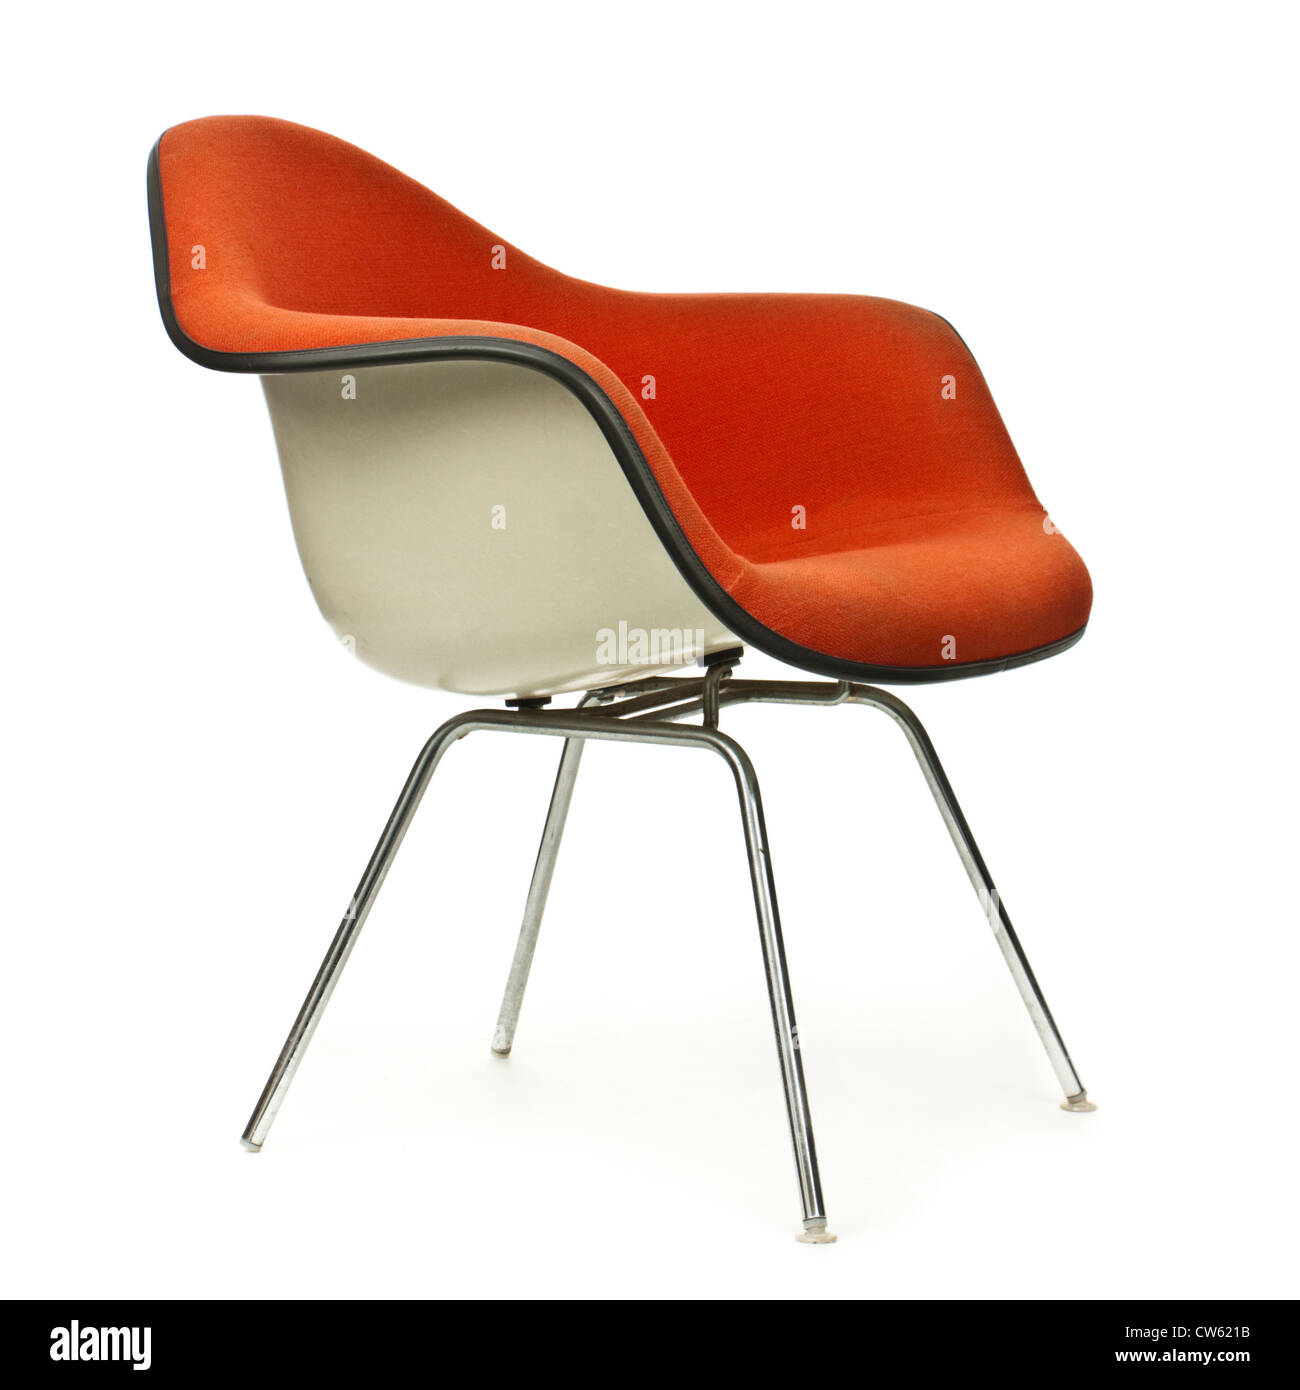 Vintage 1970's Herman Miller upholstered fibreglass shell office chair, designed by Charles & Ray Eames Stock Photo